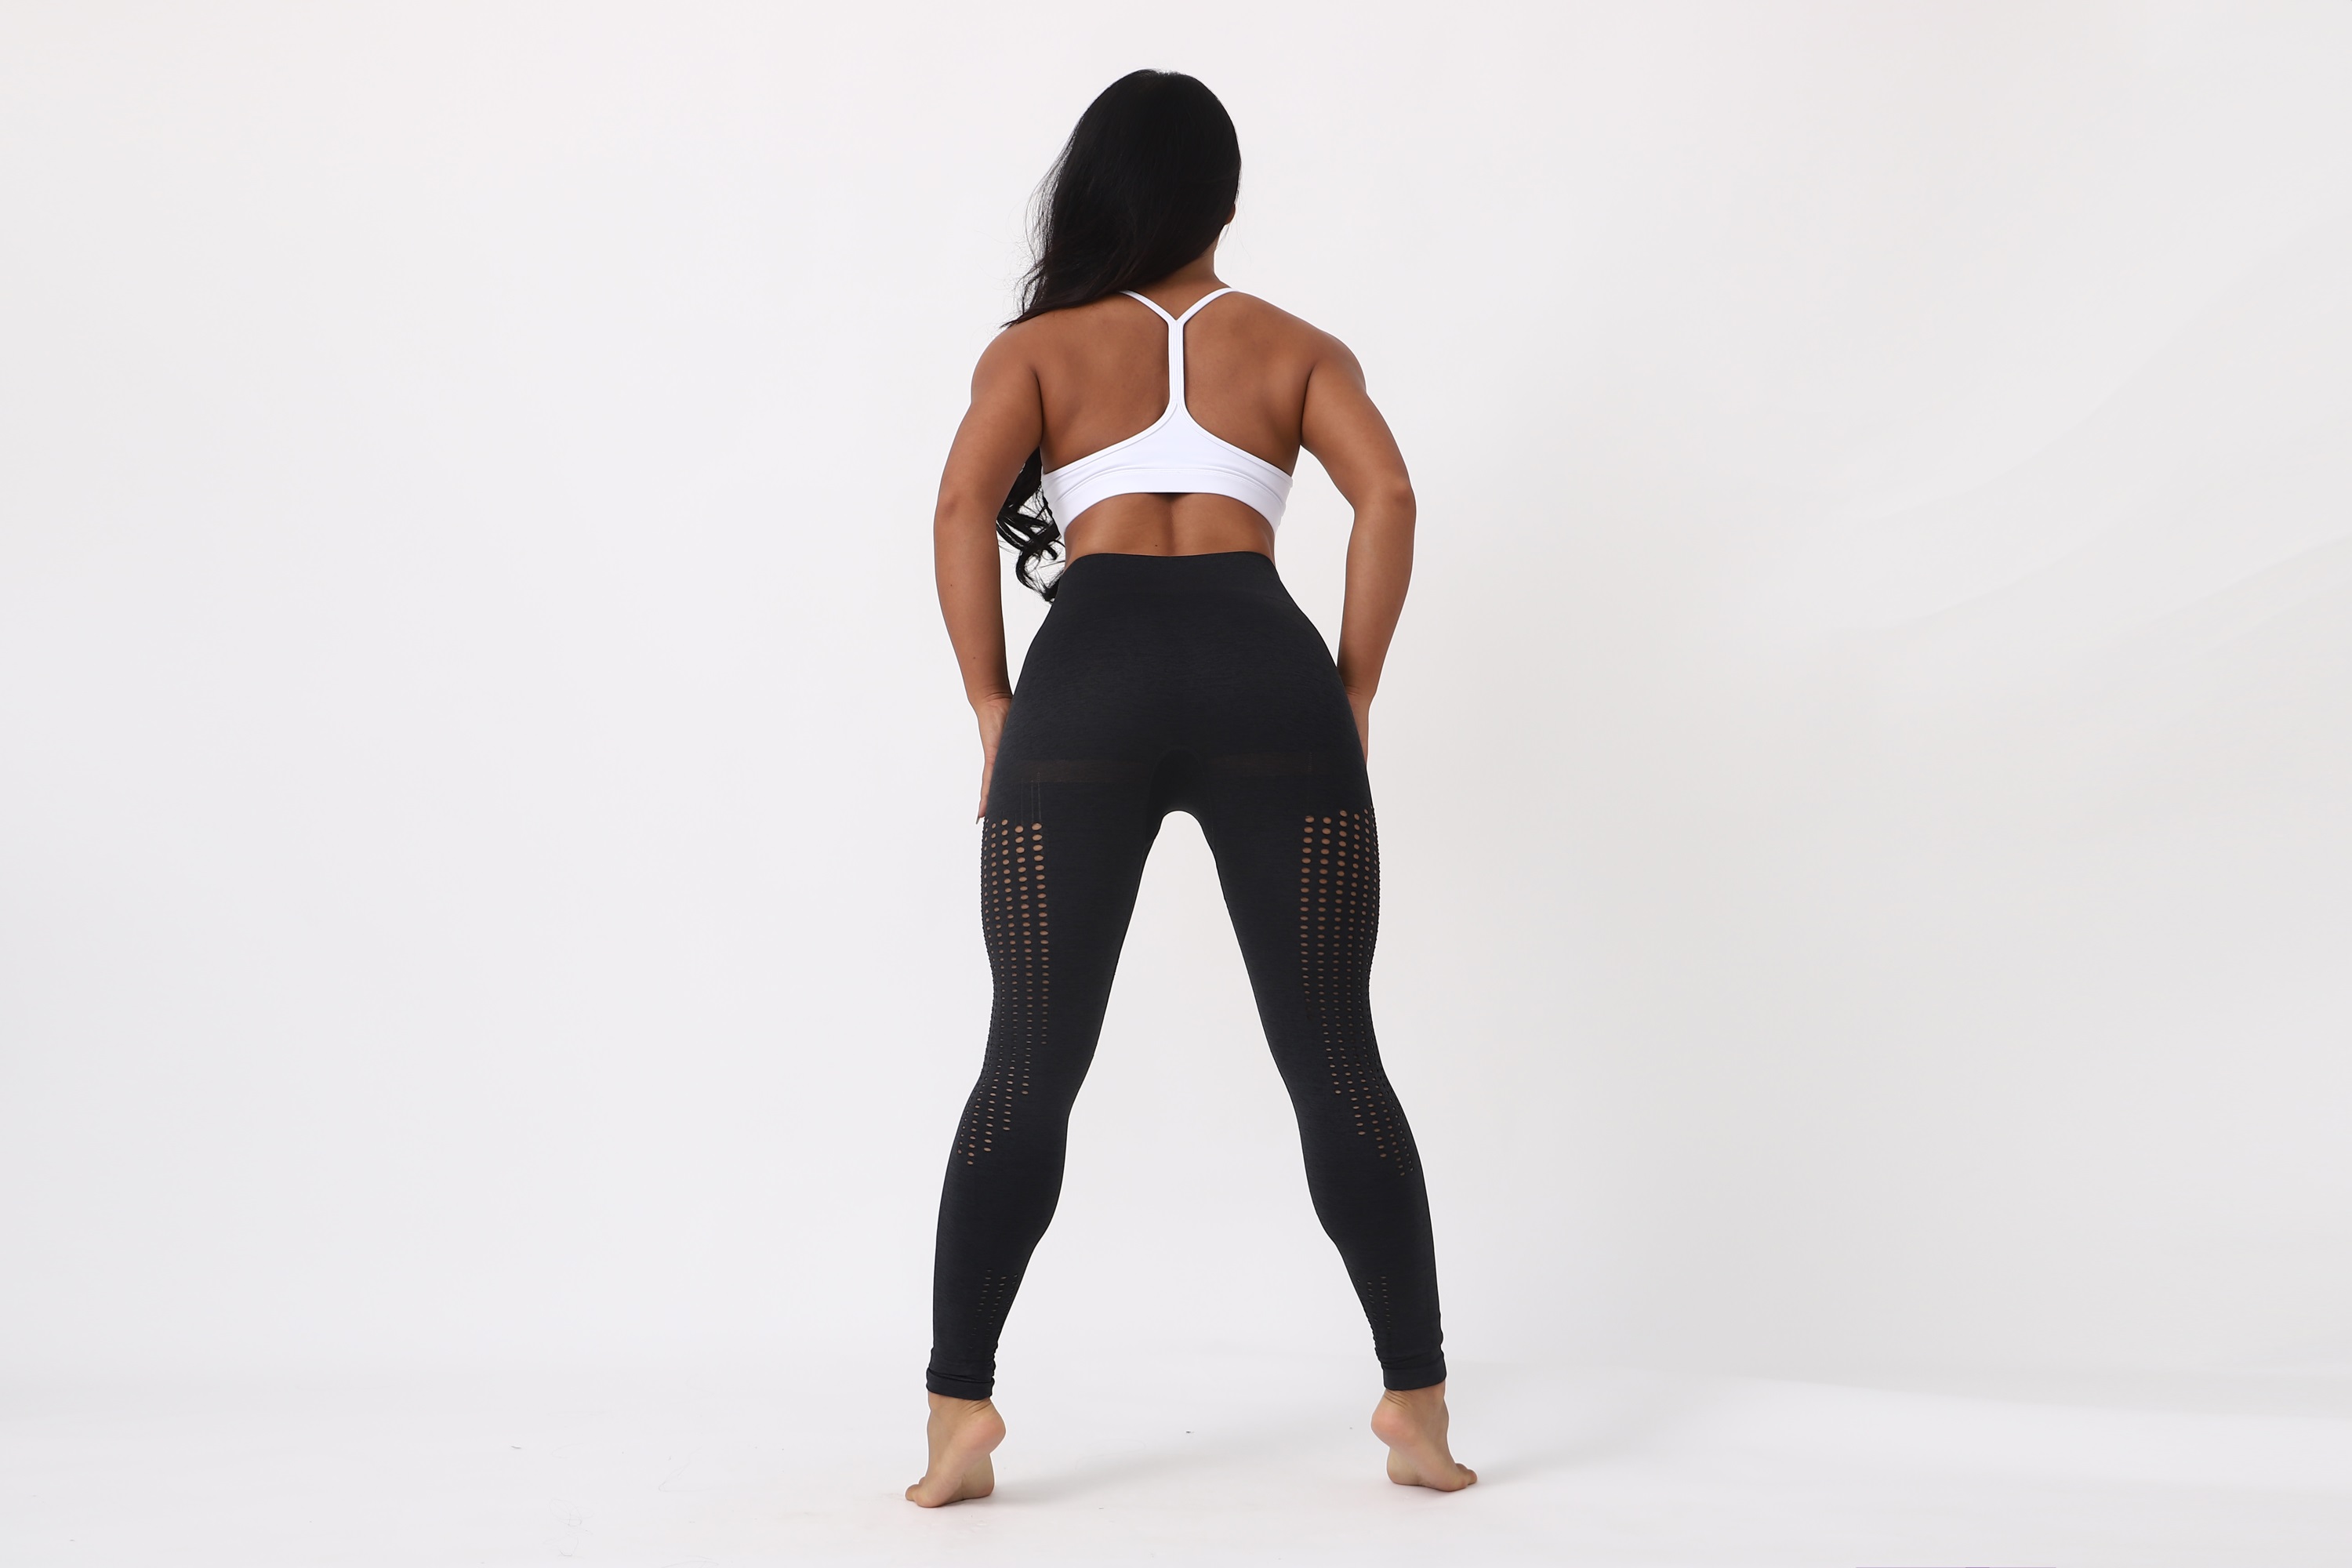 Women's Thick High Waist Yoga Exercise Stretch Stretch Pants Tummy Control Slimming Lifting Anti Cellulite Scrunch Booty Leggings Ruched Butt Seamless Tights Sport Workout - image 2 of 8